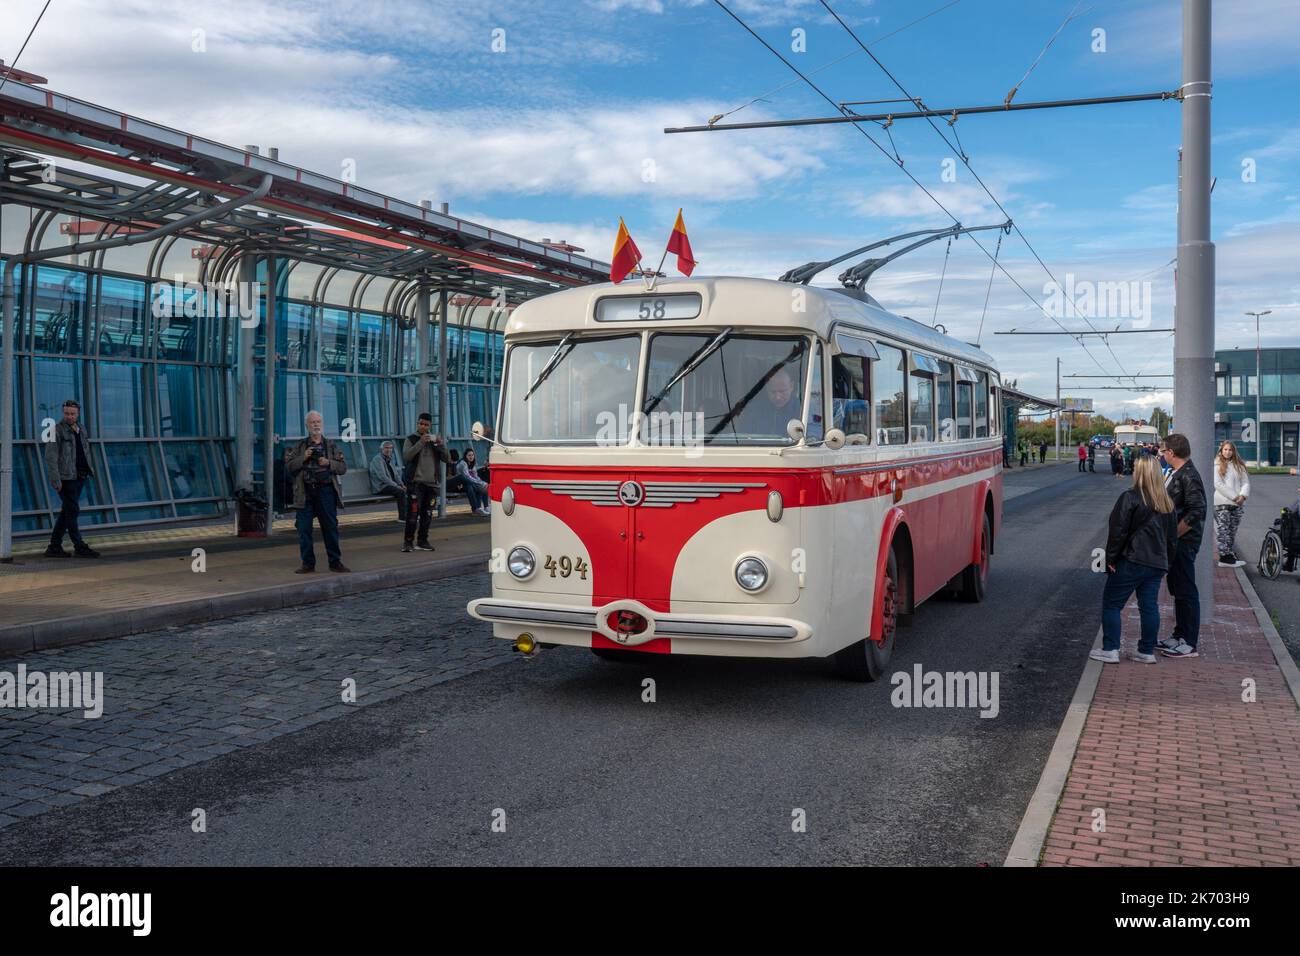 Czech trolleybus on public display in the open. Škoda 8Tr type produced from 1950s to 1960s. Stock Photo